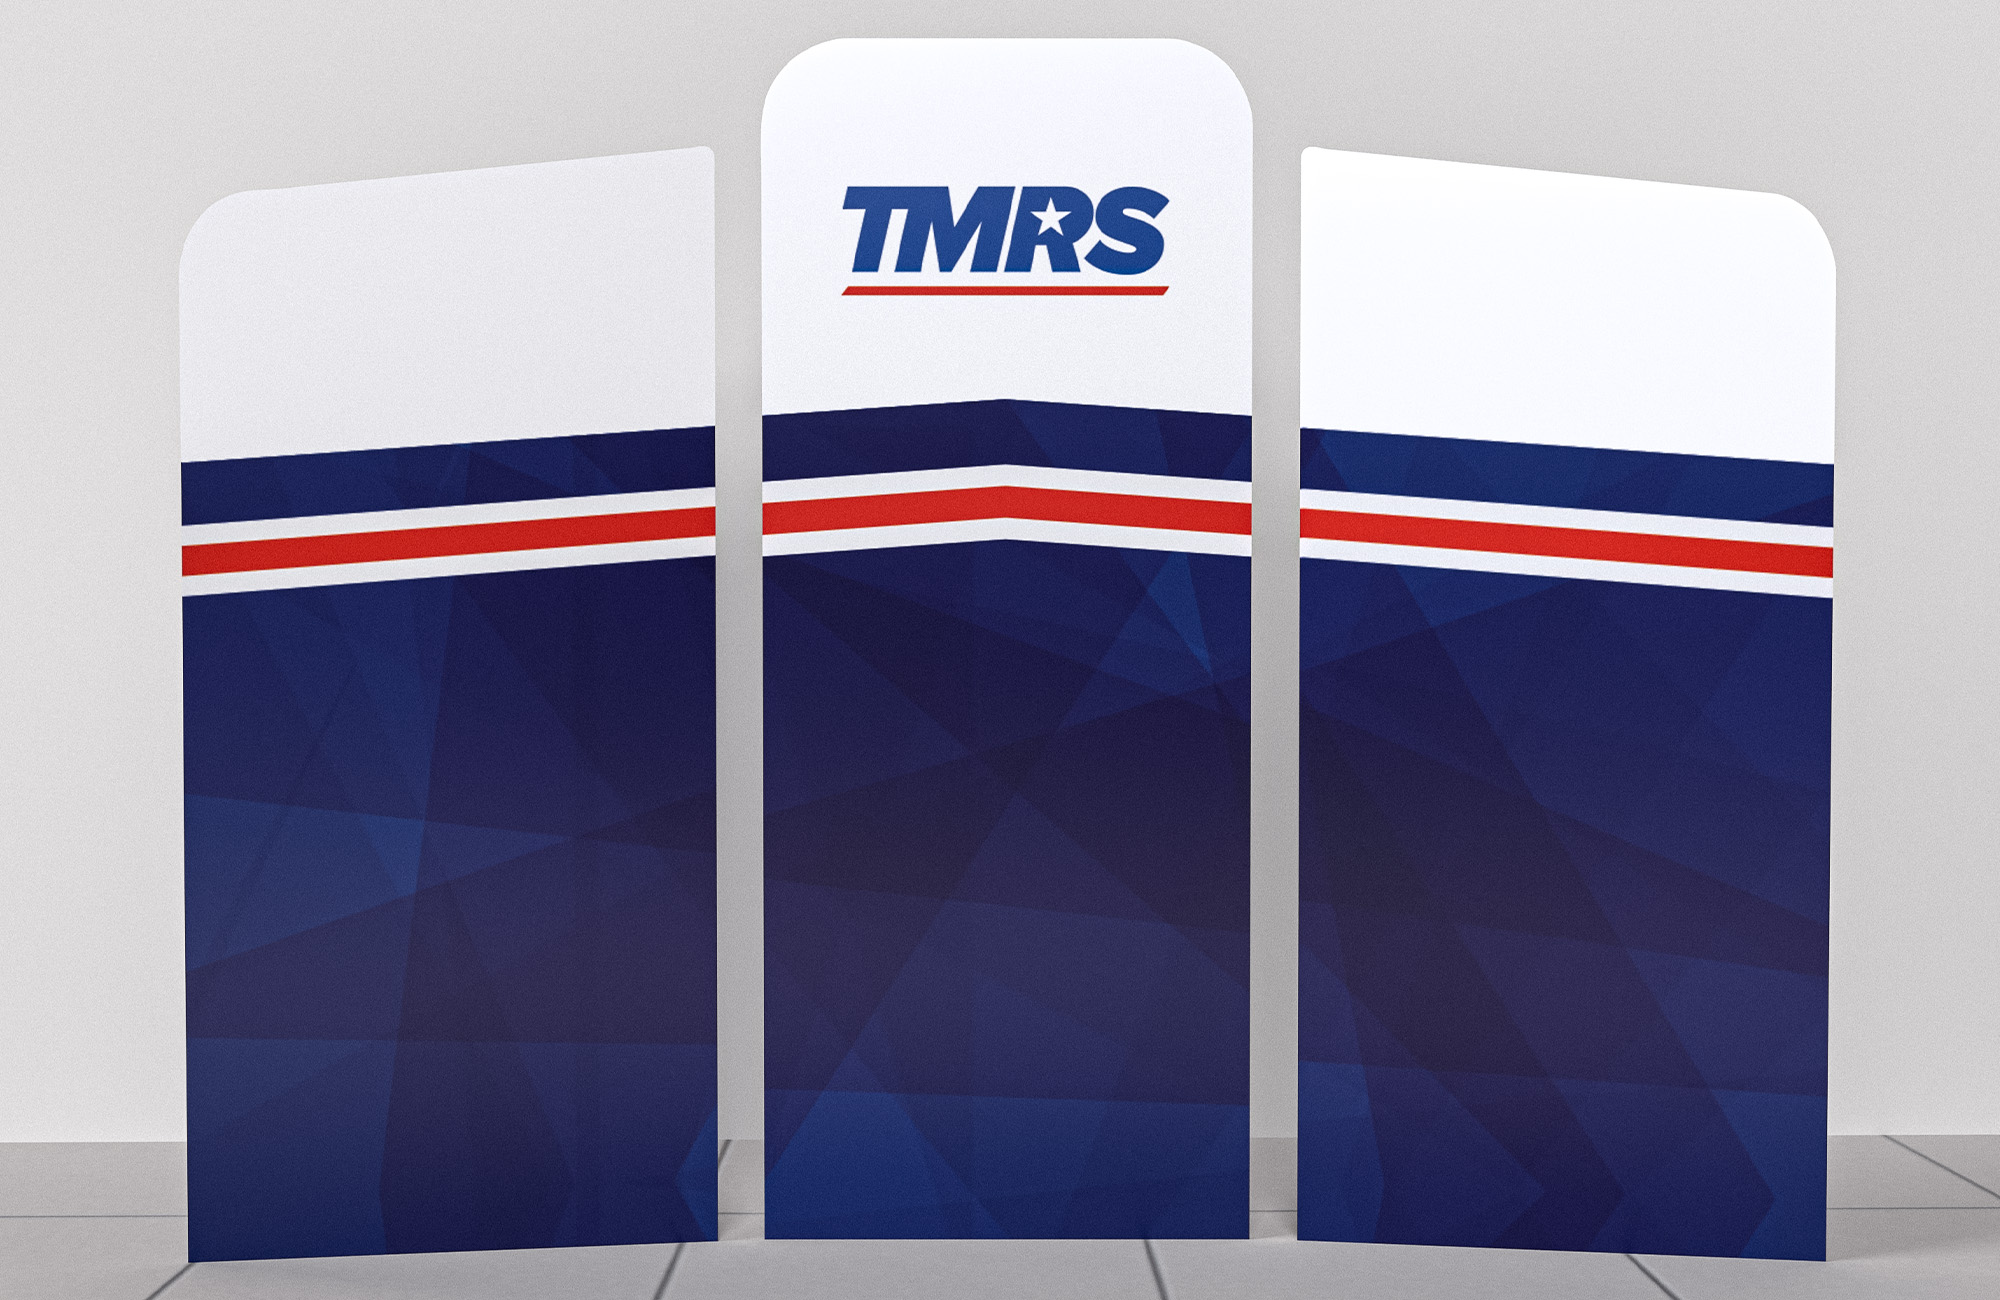 A full view of a booth that displays in three parts. The middle panel is the tallest and displays the TMRS logo at the top. The two side panels are slightly shorter. Across all three panels is a dark blue angular pattern.